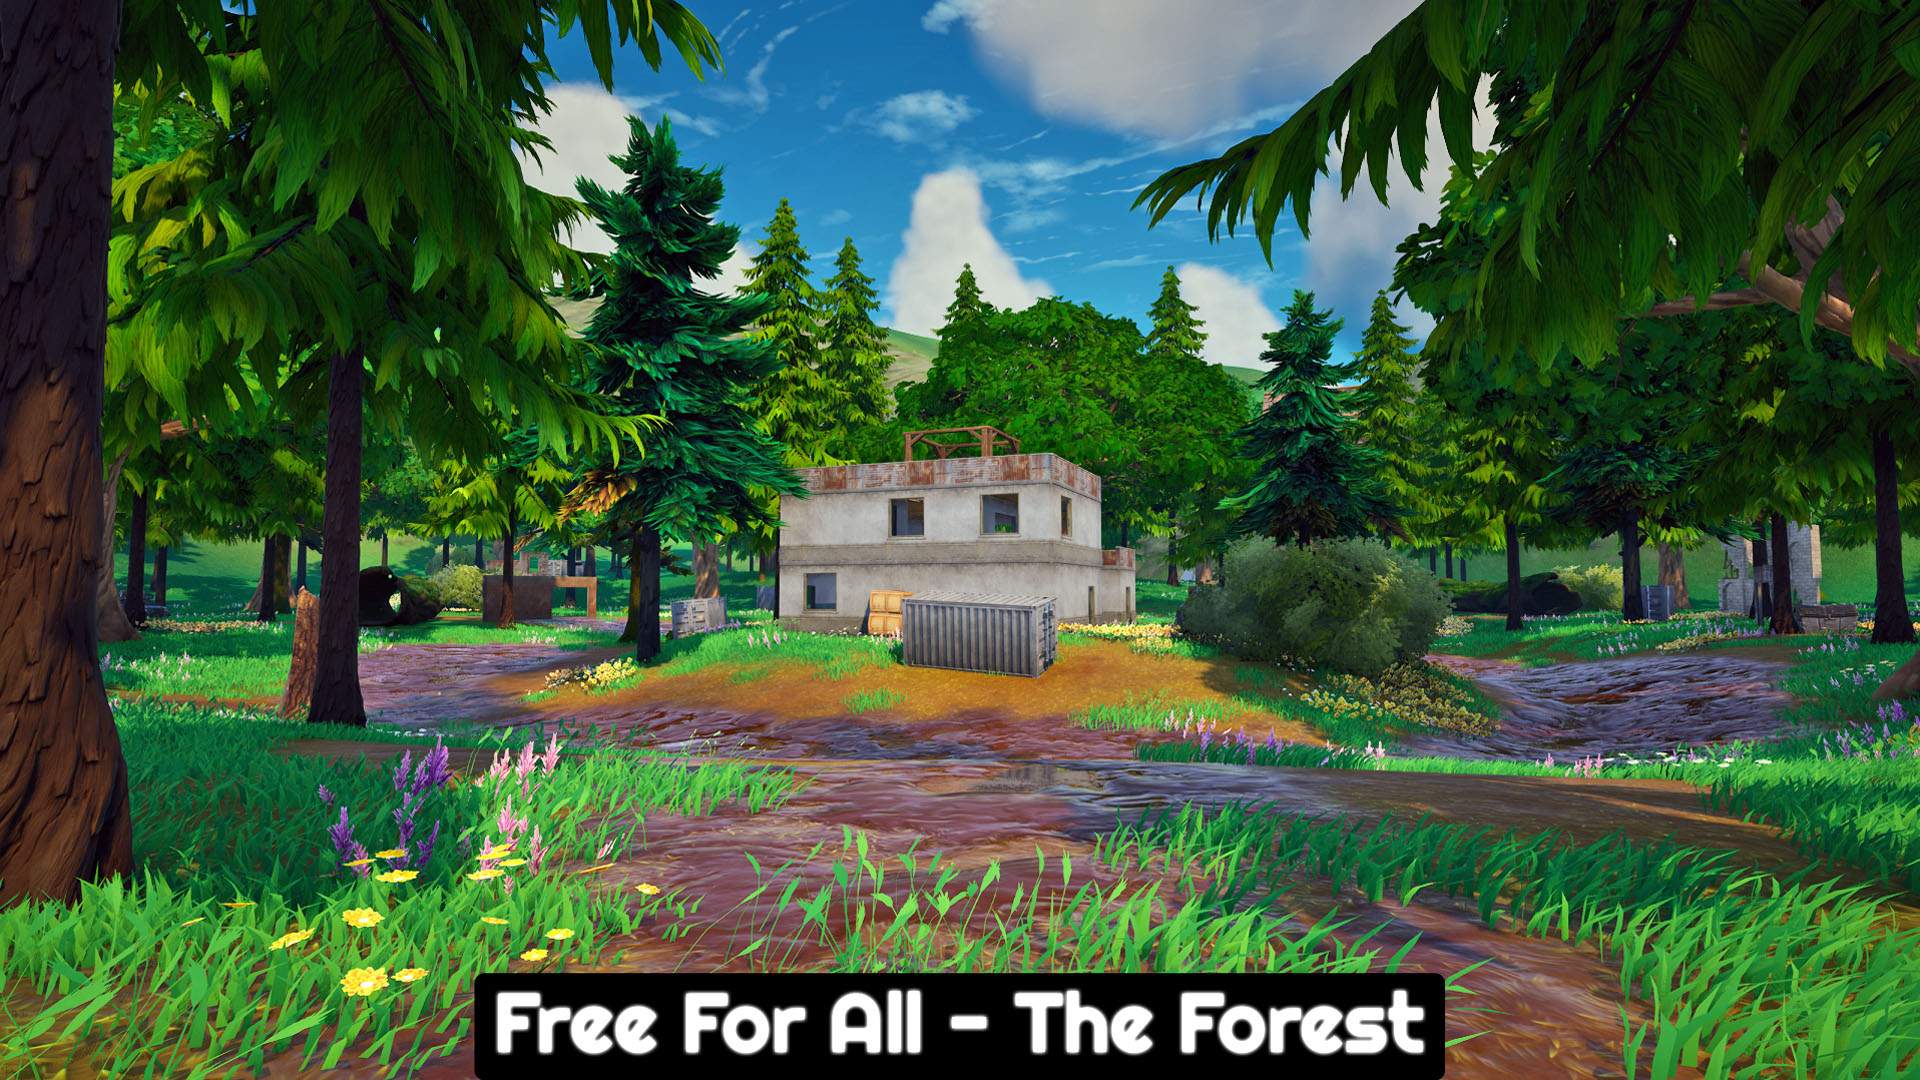 🌲Free For All - The Forest🌲